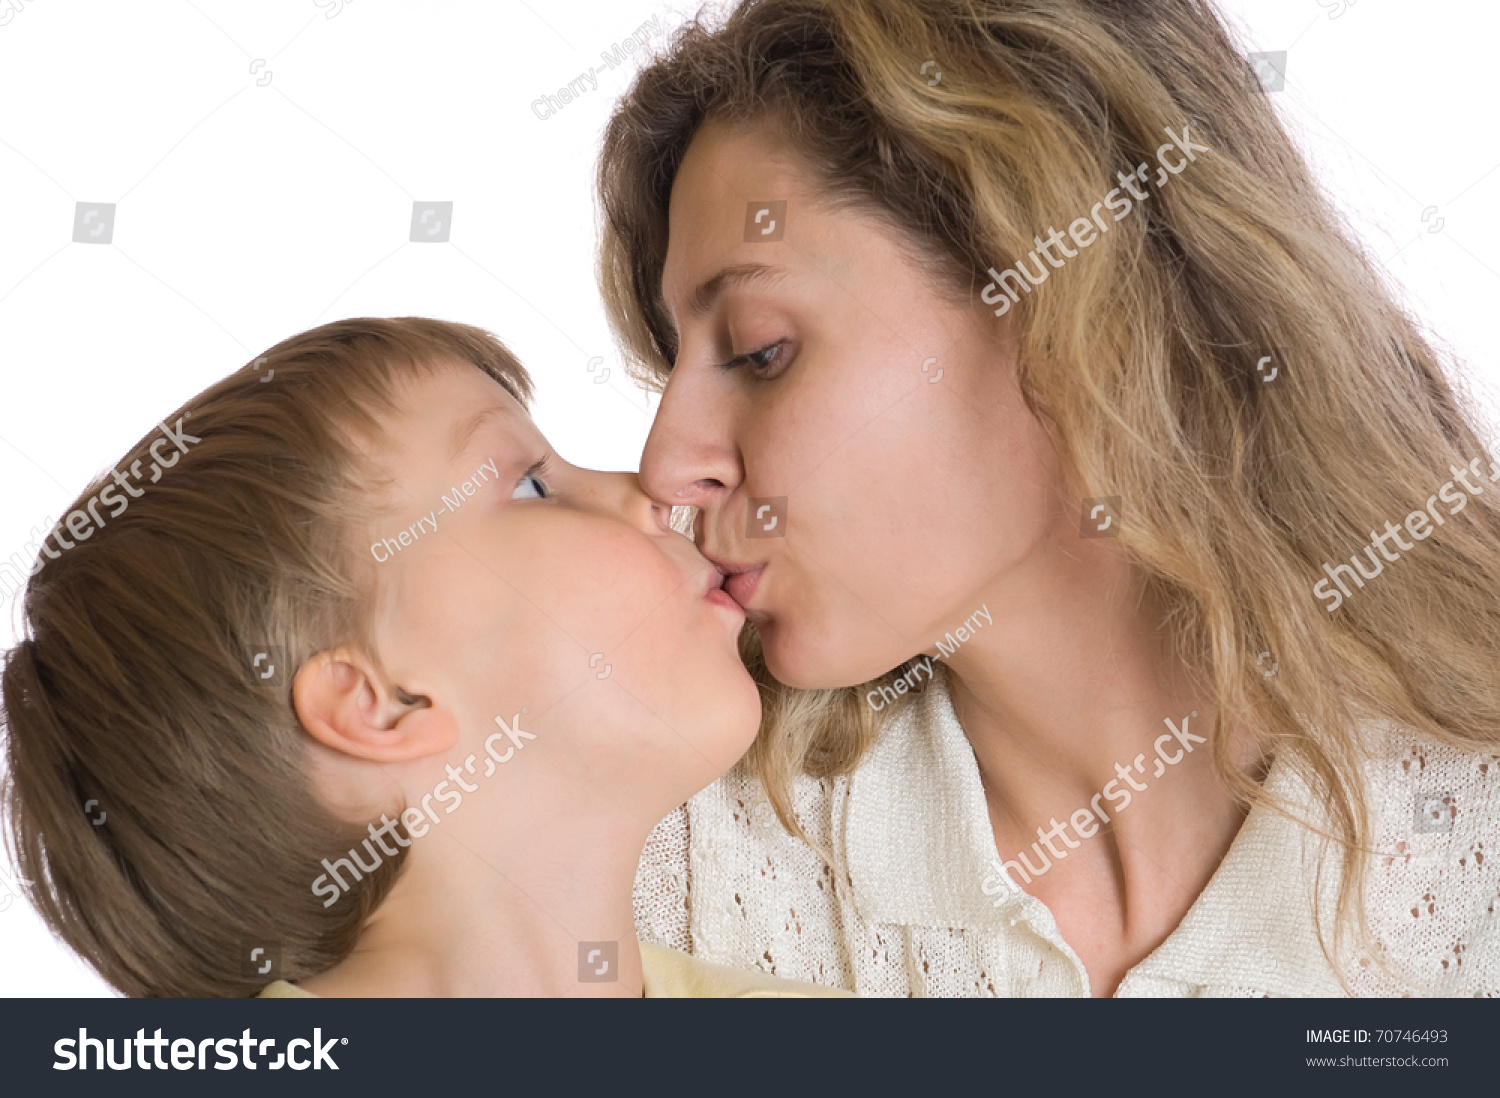 chloe gill recommends mom and son making out pic